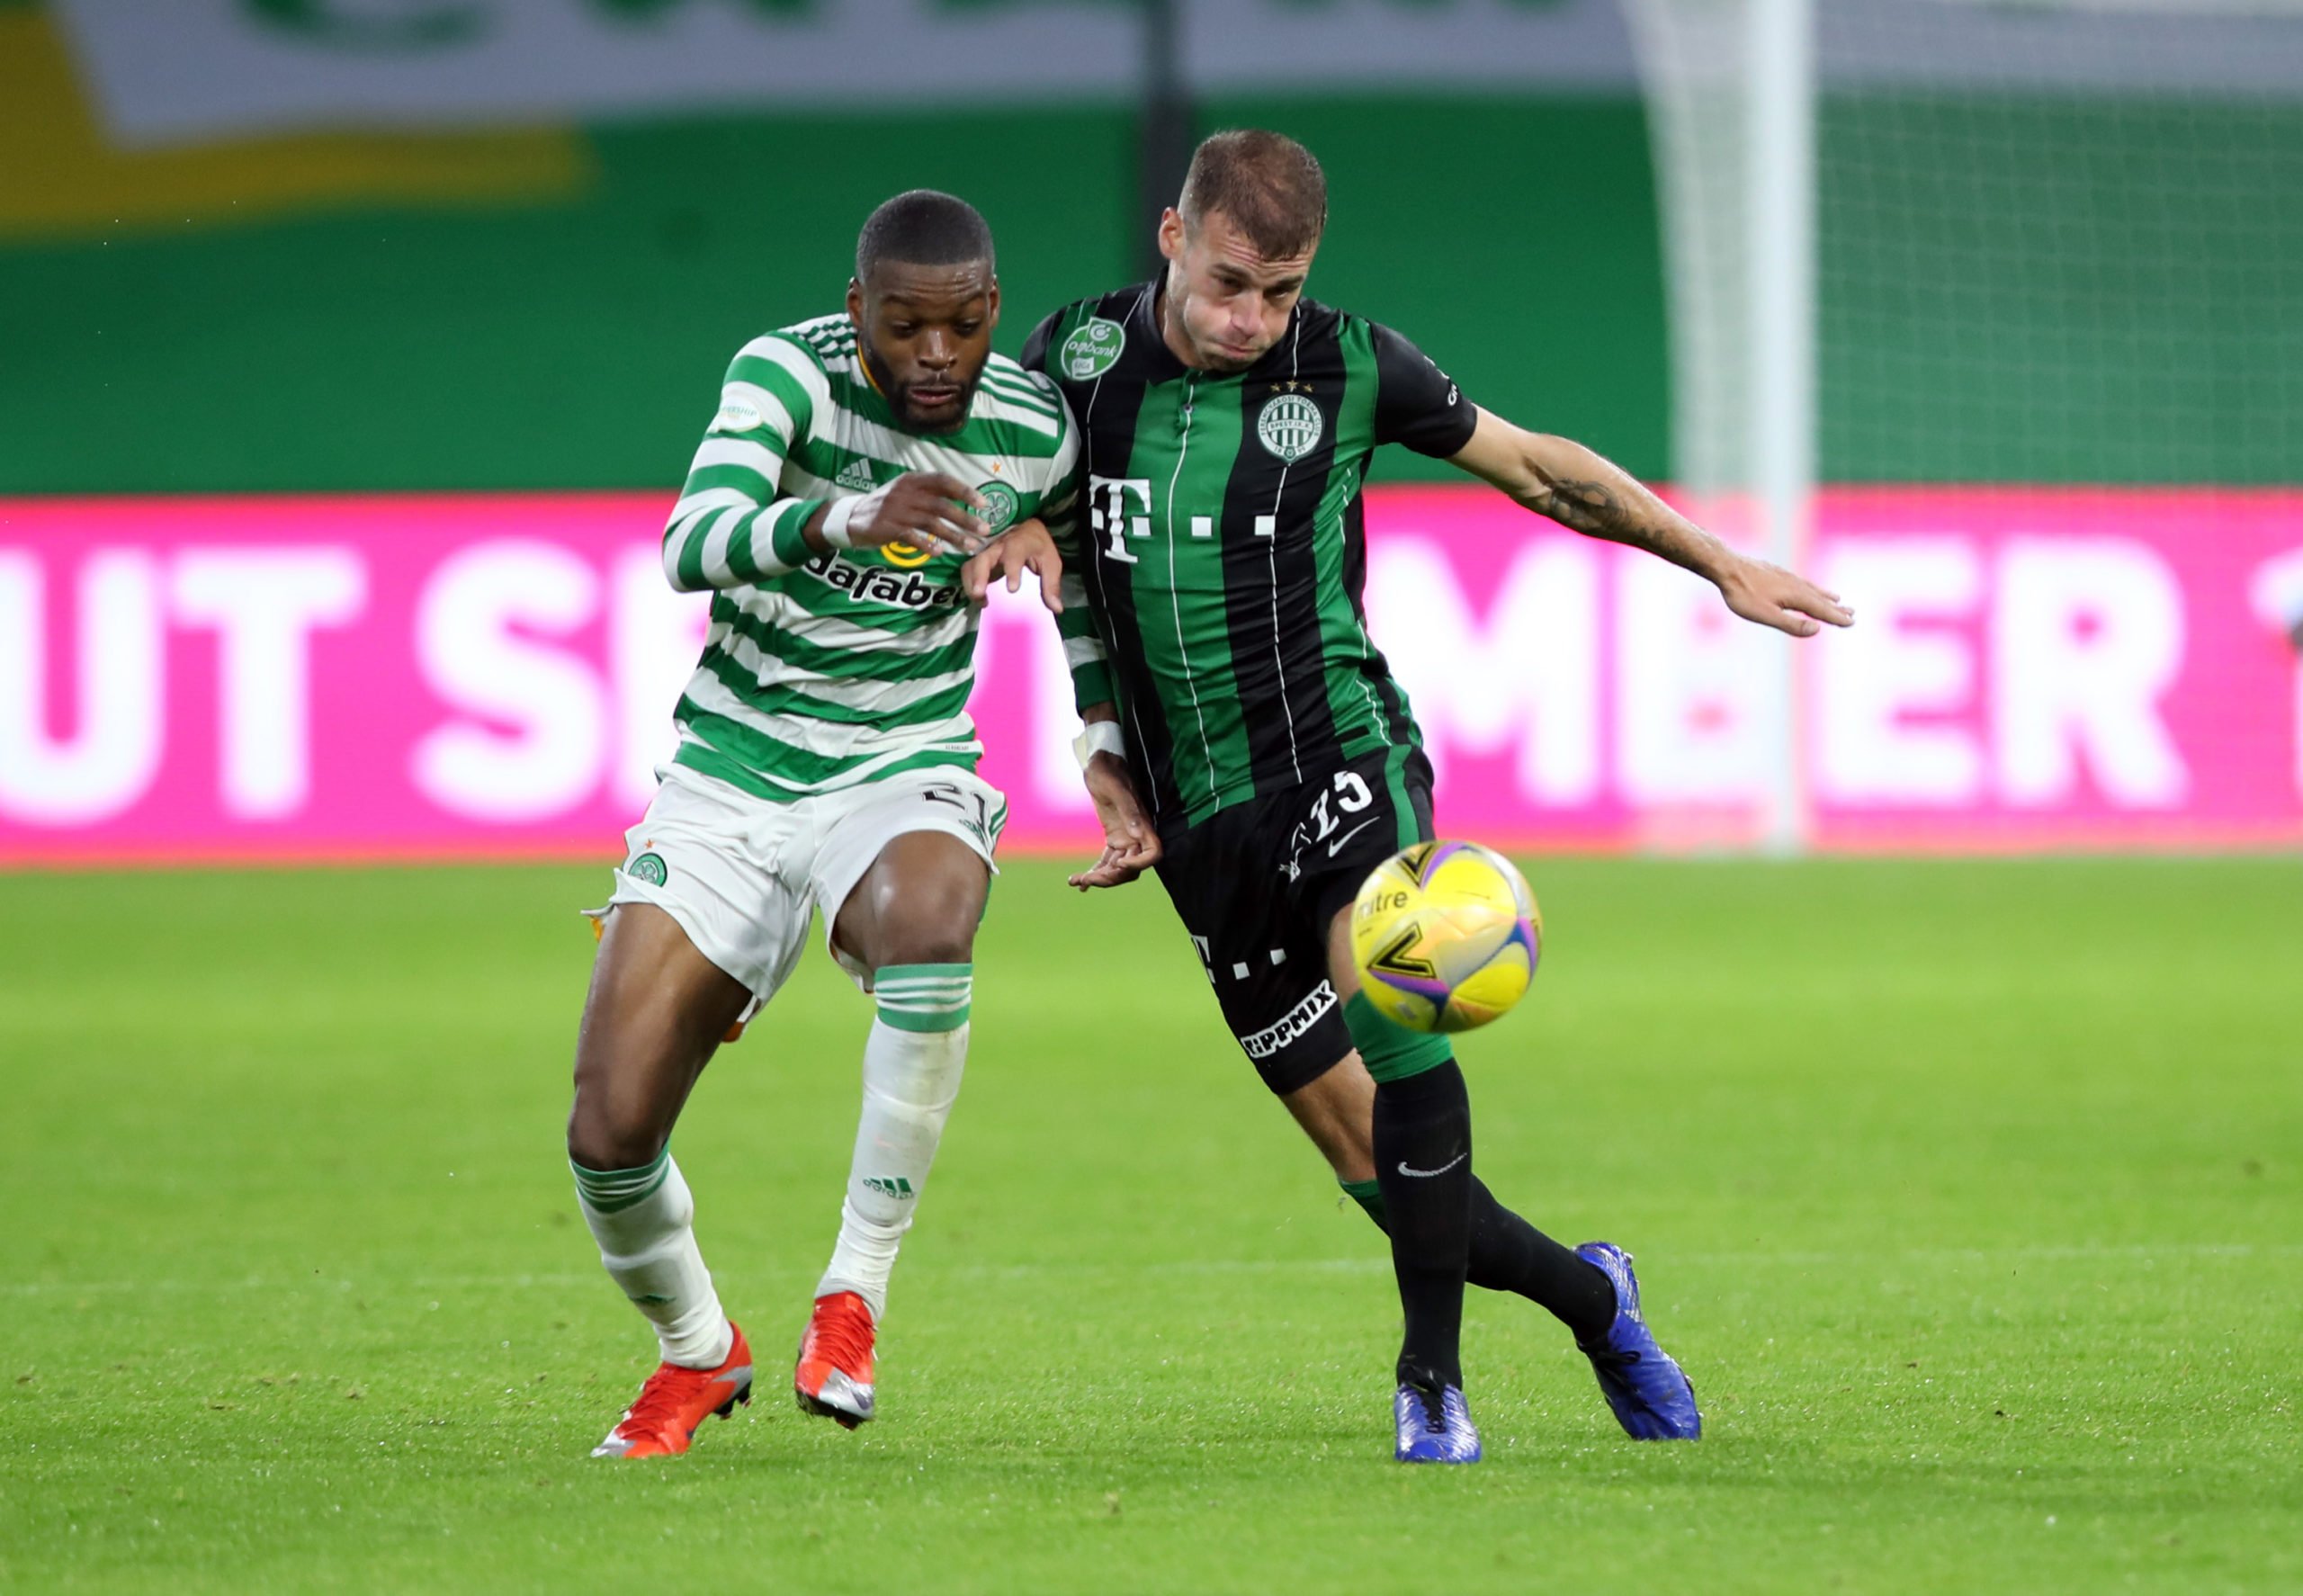 Chris Sutton believes Olivier Ntcham will leave Celtic after David Turnbull's arrival